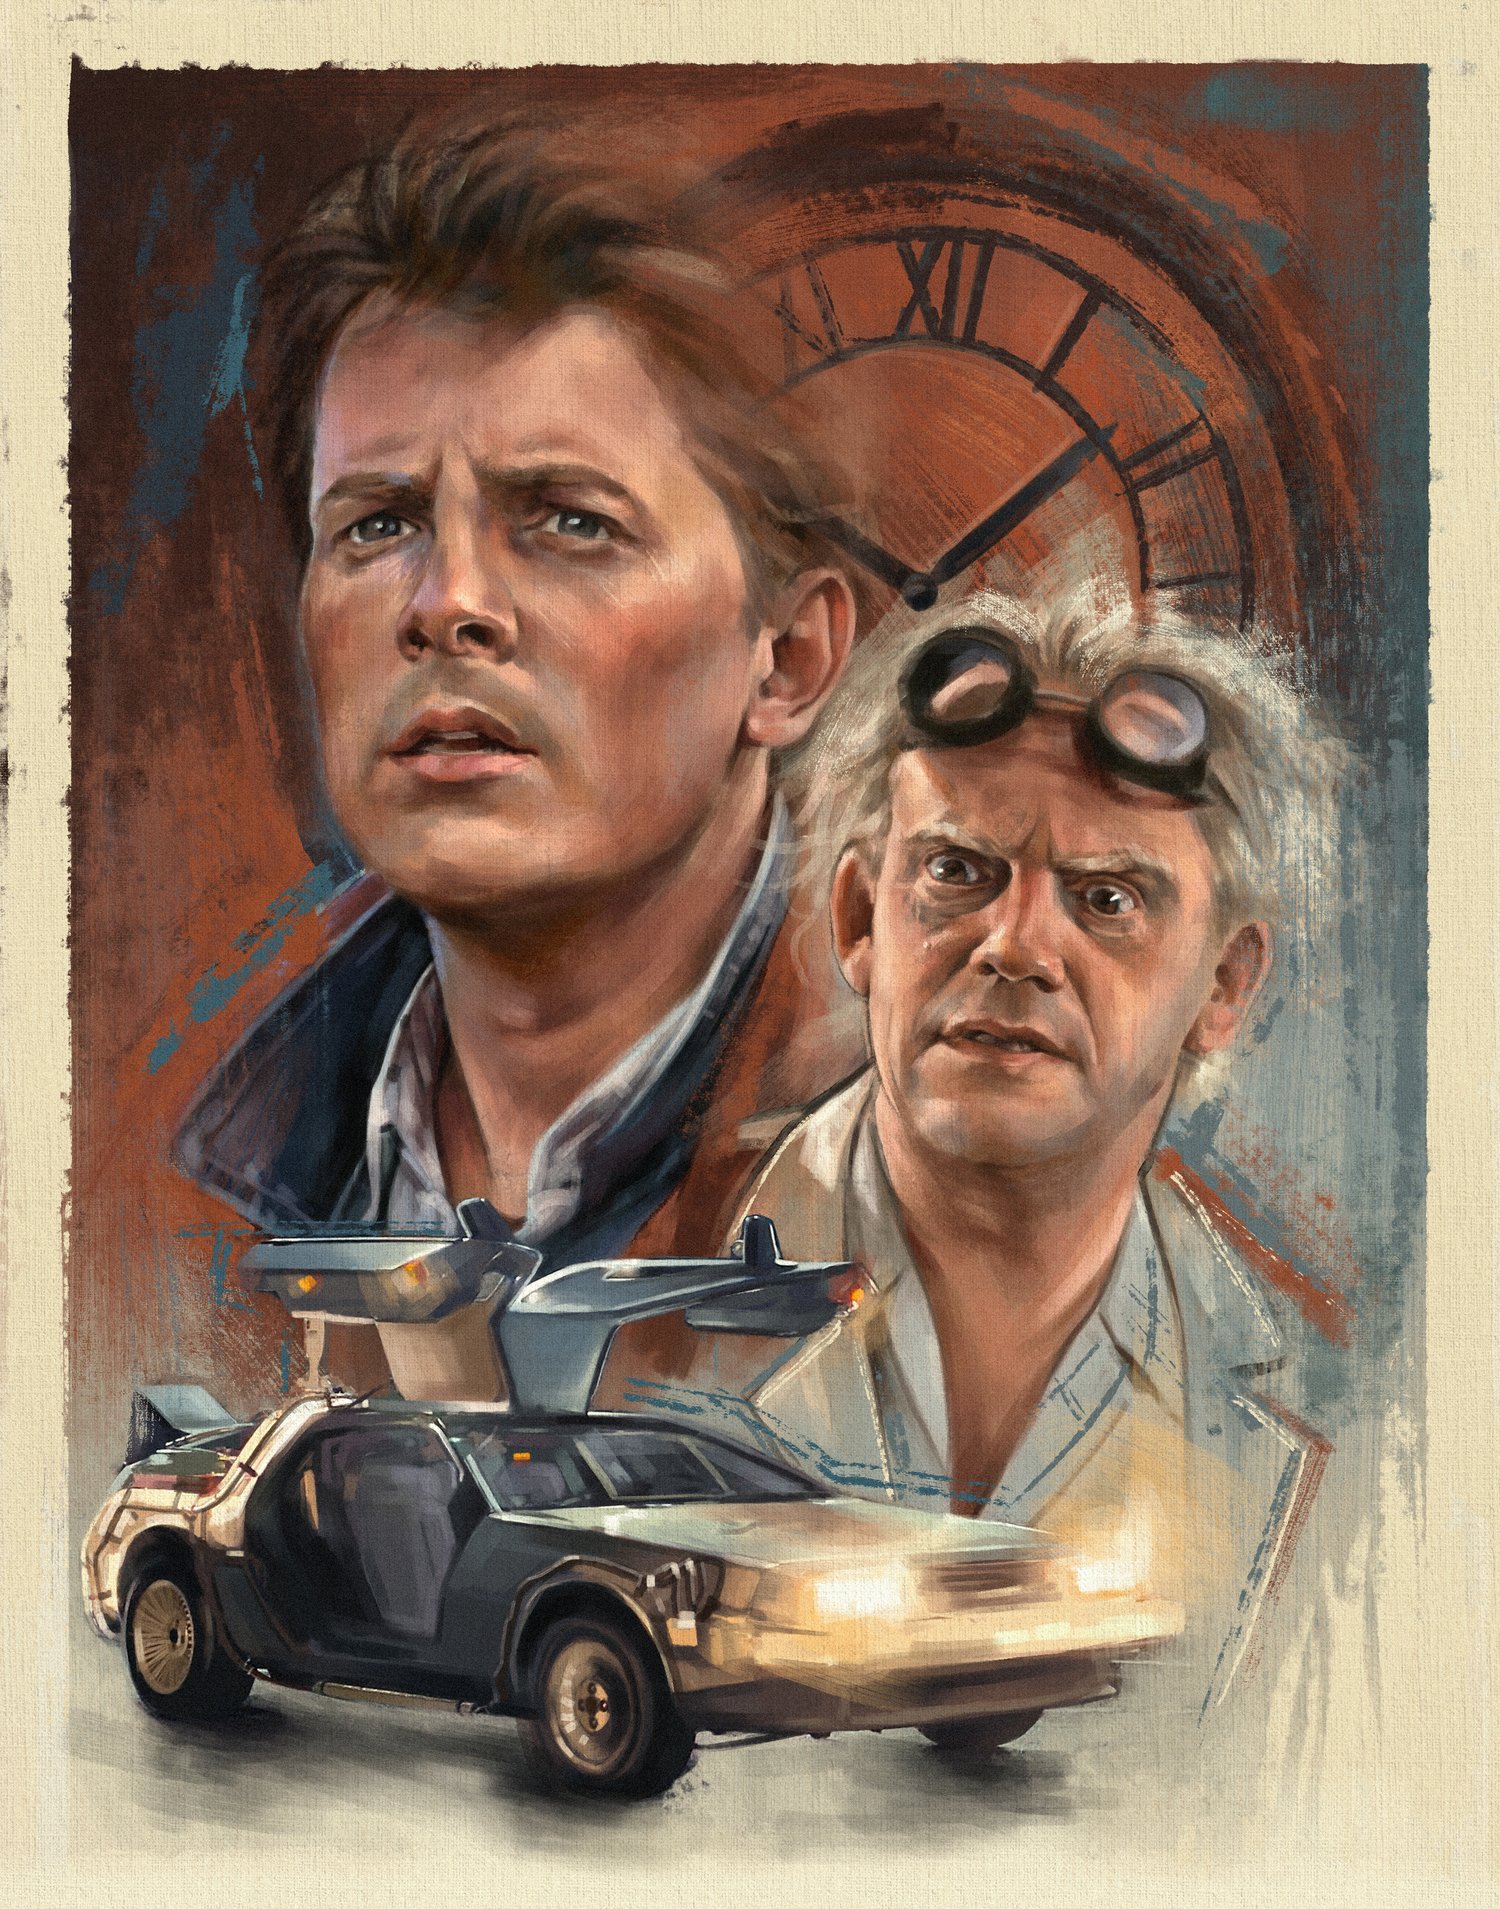 Image of Back to the Future